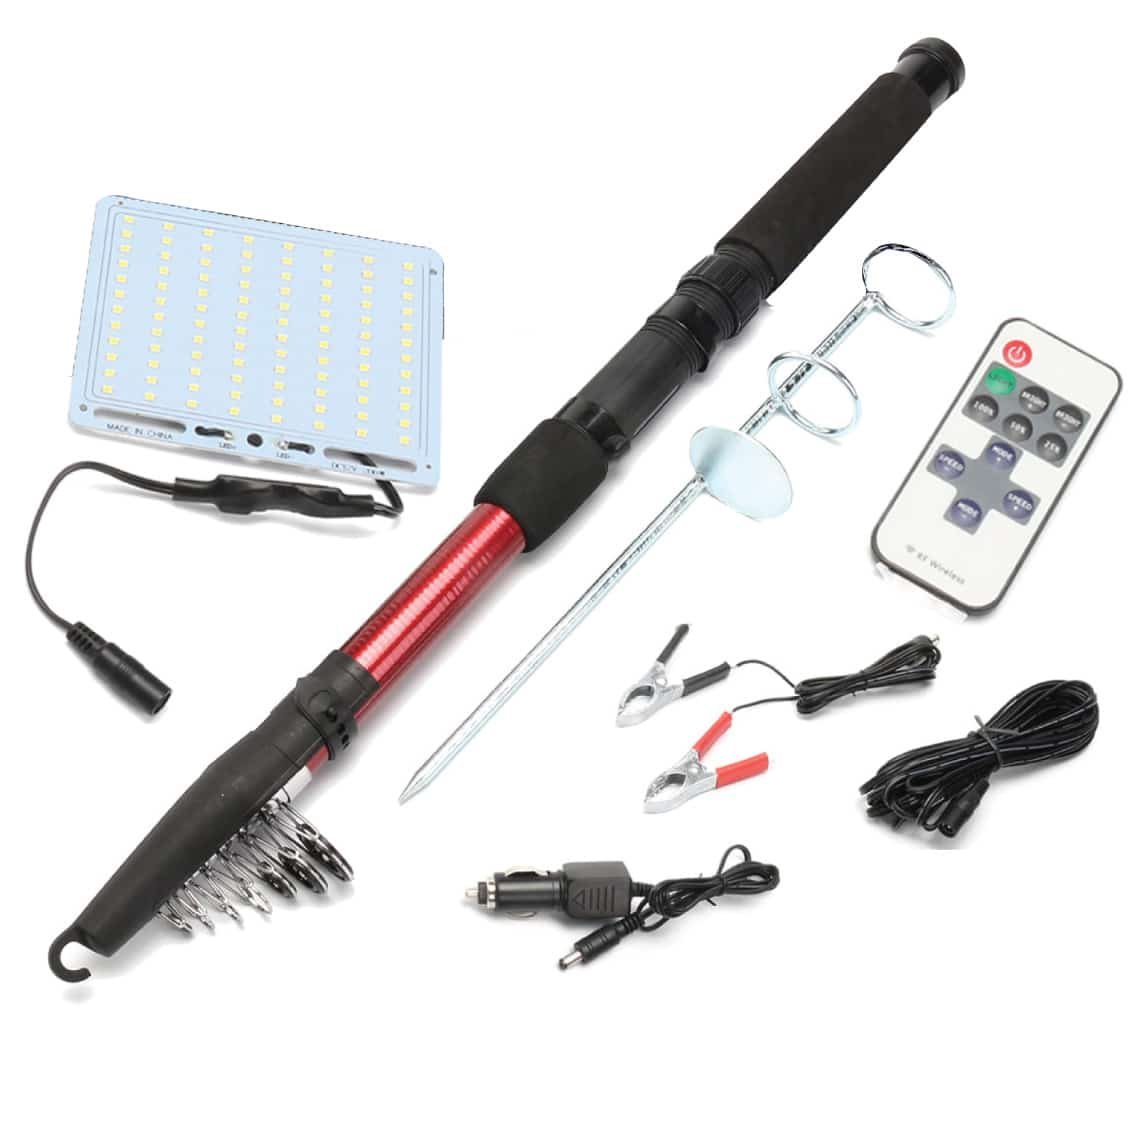 Telescopic Light with Remote Control (Perfect for Camping and